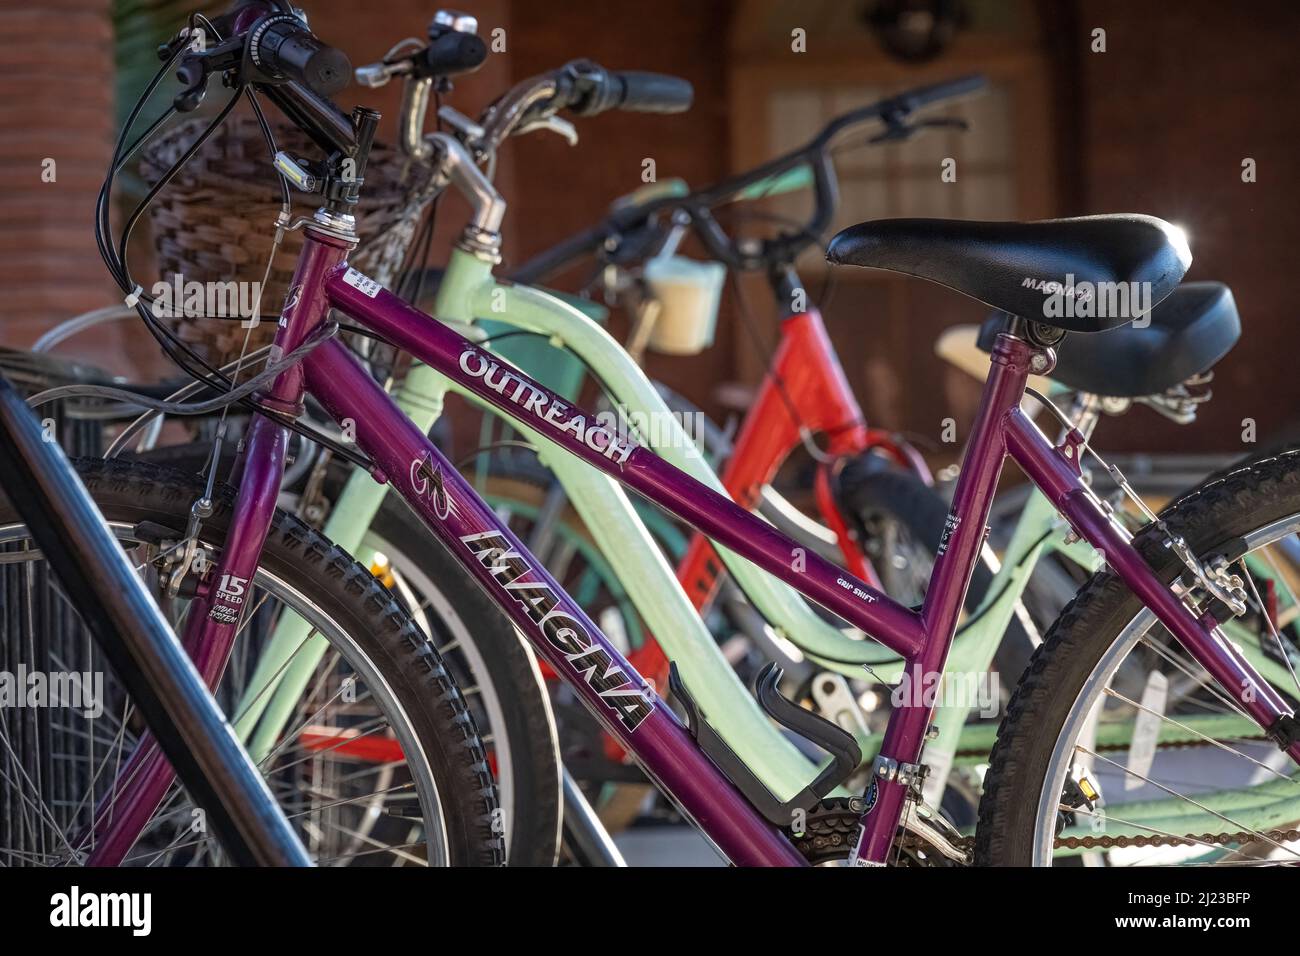 Beach cruiser bikes at Flagler College campus in historic downtown St. Augustine, Florida. (USA) Stock Photo